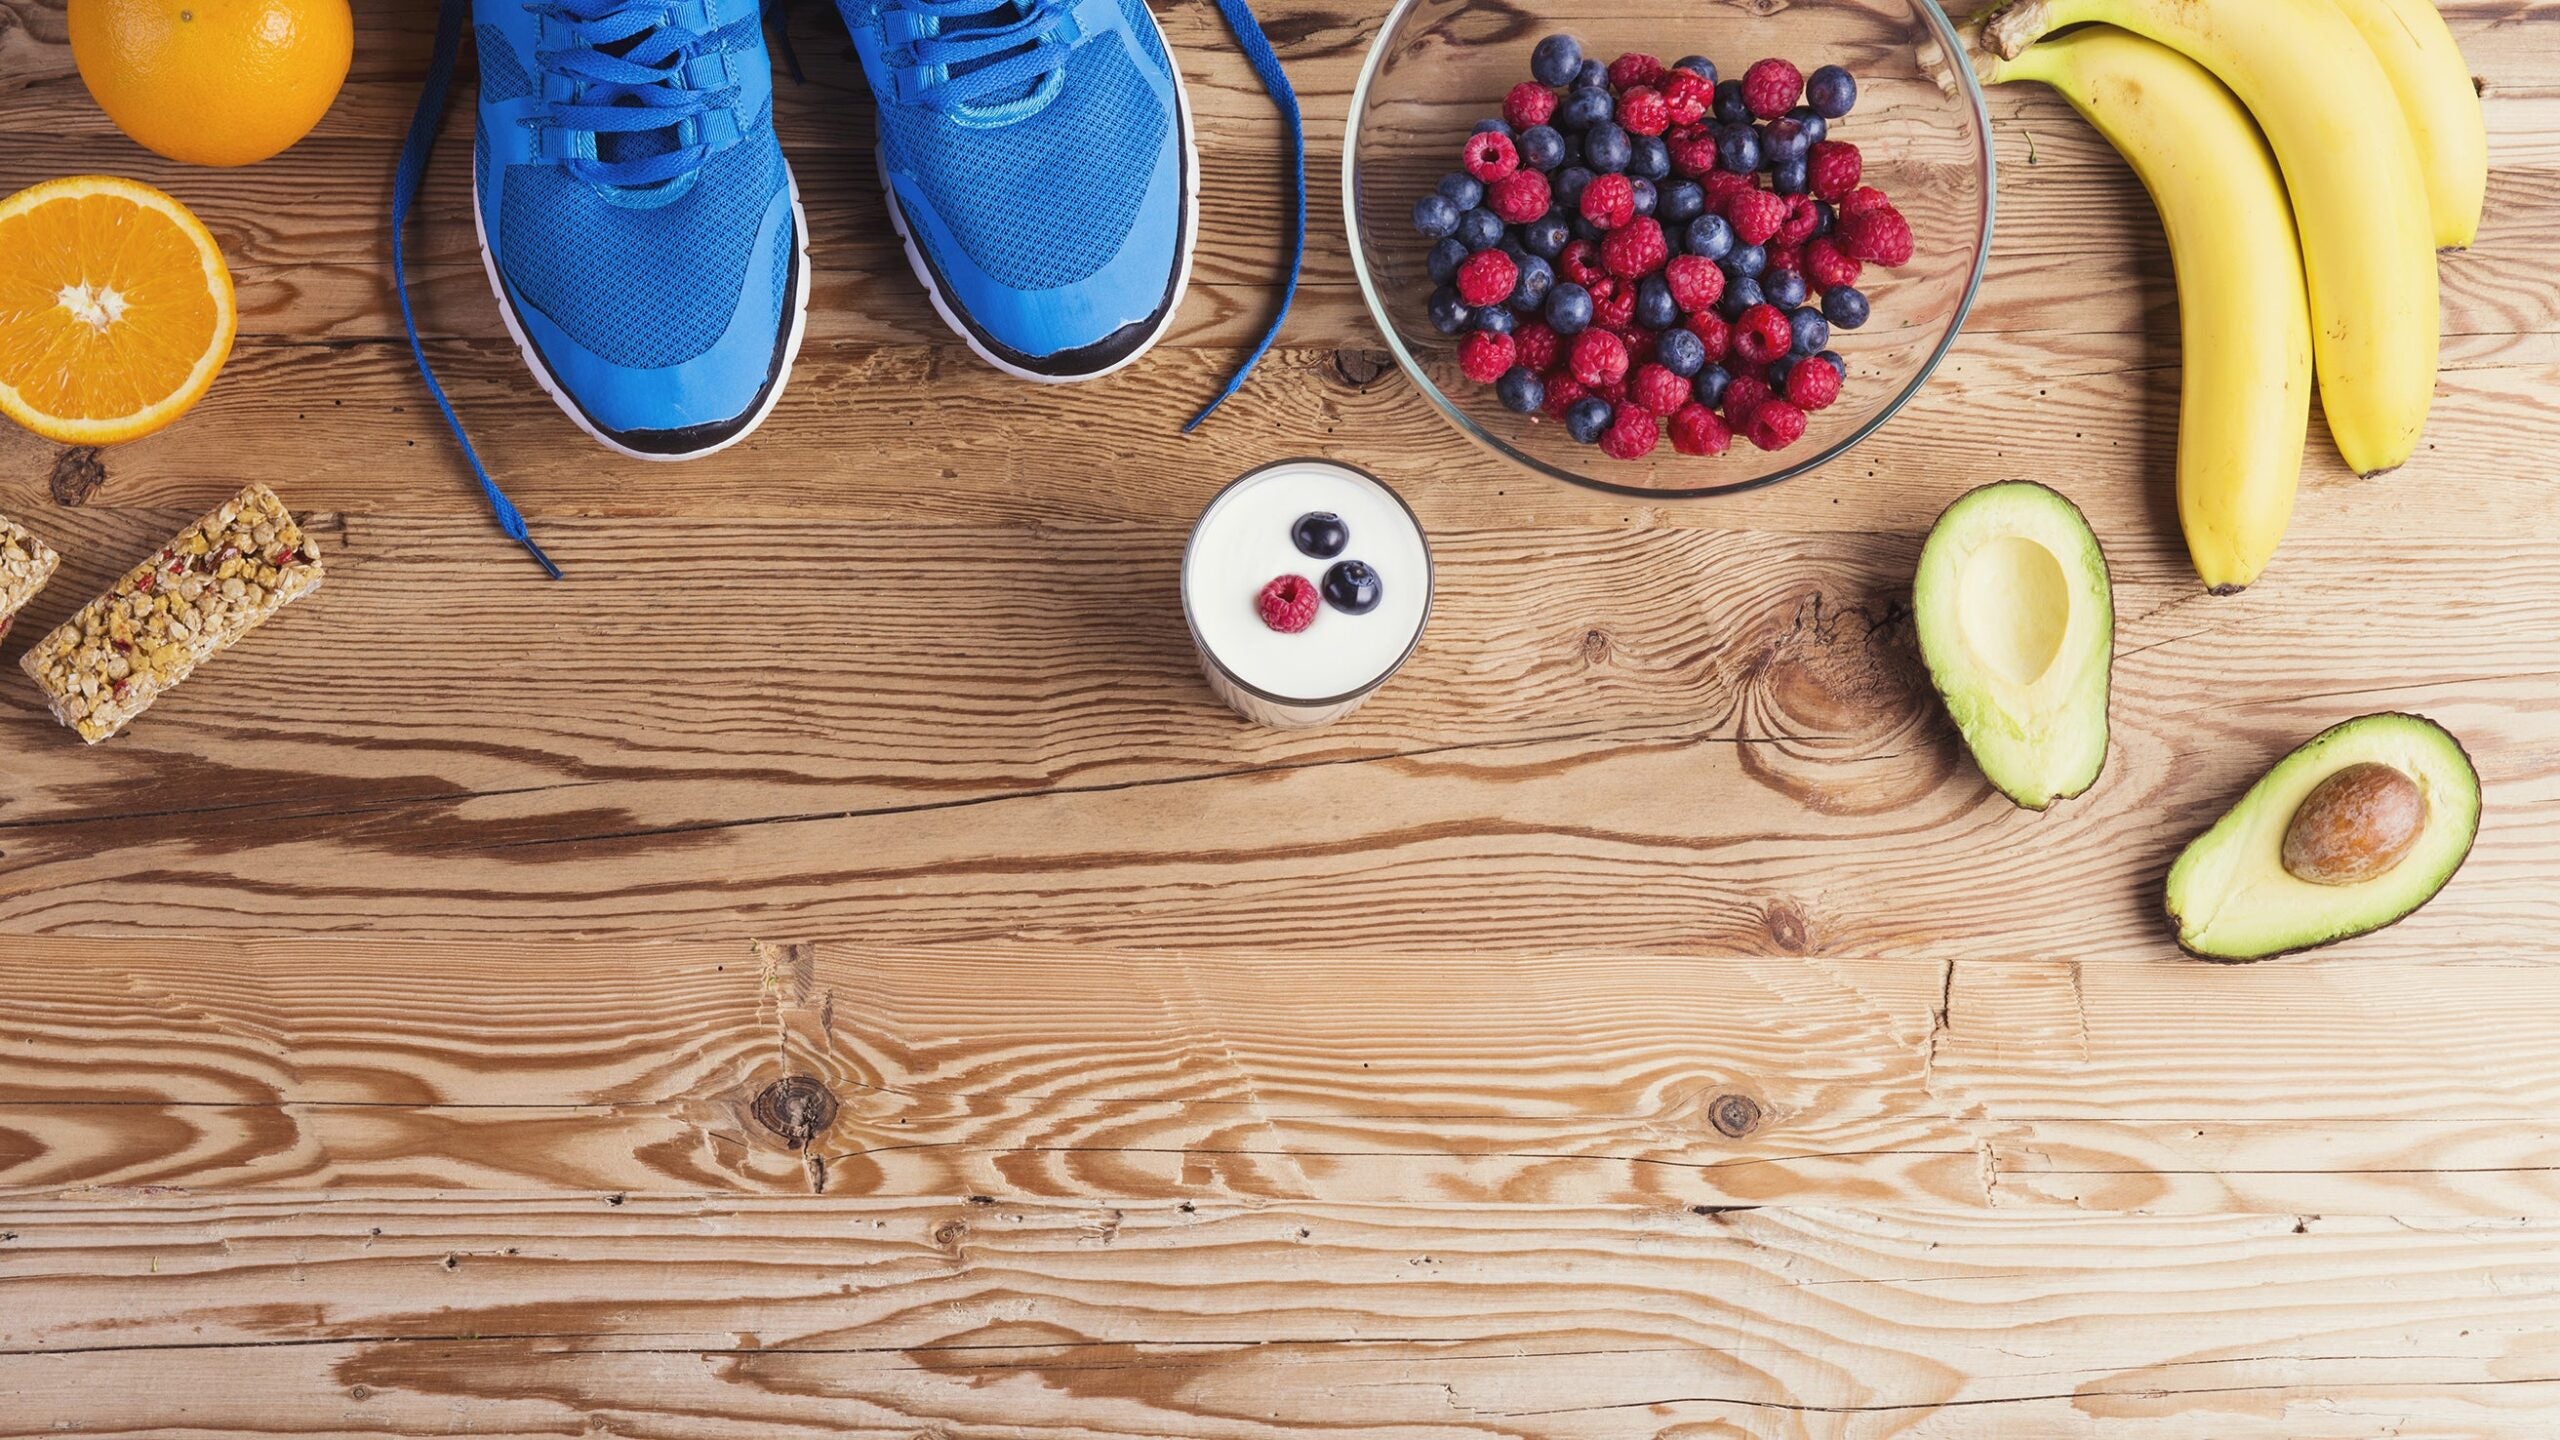 II. Understanding the Role of Nutrition in Running Performance